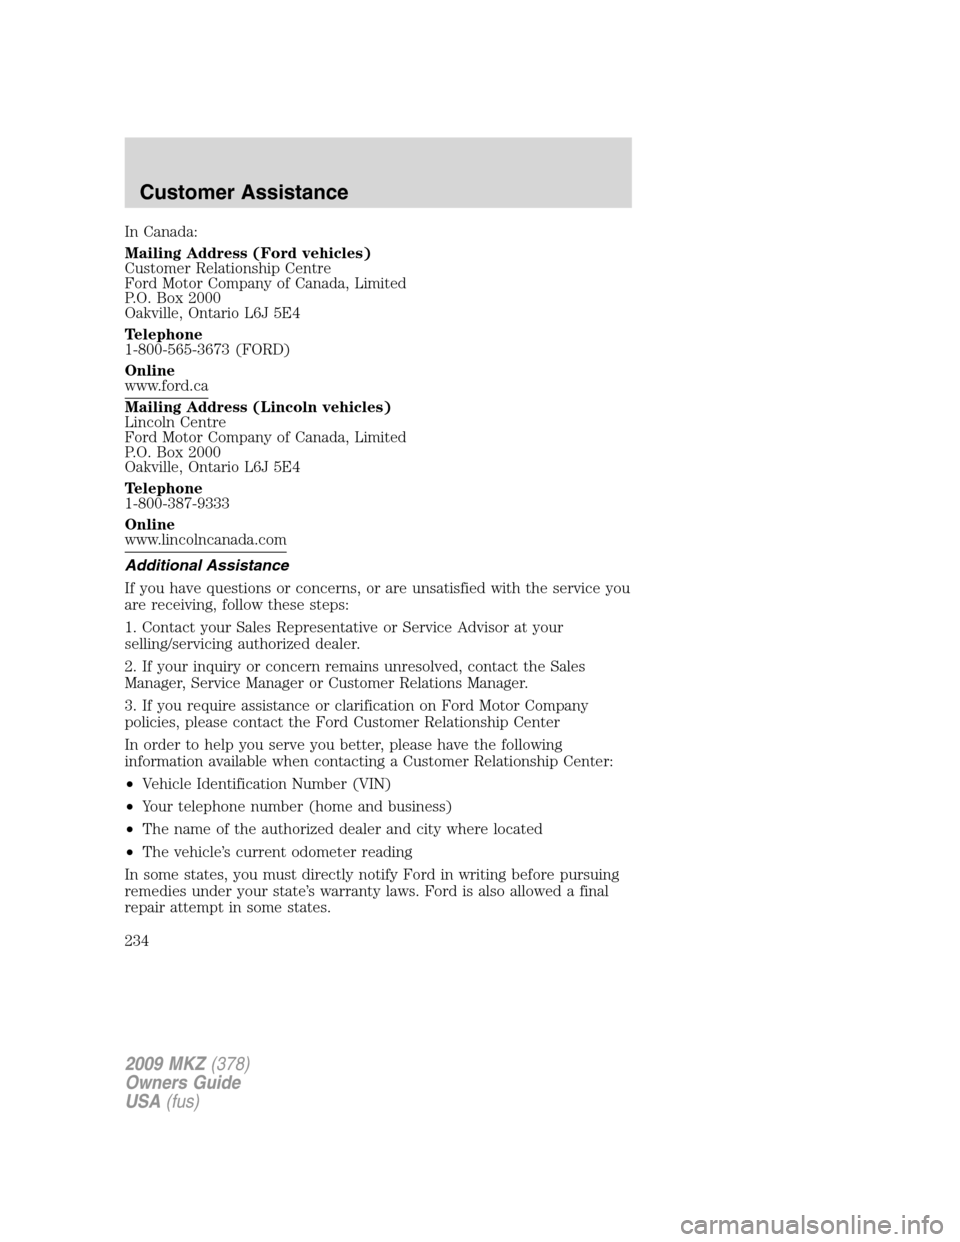 LINCOLN MKZ 2009 Service Manual In Canada:
Mailing Address (Ford vehicles)
Customer Relationship Centre
Ford Motor Company of Canada, Limited
P.O. Box 2000
Oakville, Ontario L6J 5E4
Telephone
1-800-565-3673 (FORD)
Online
www.ford.ca